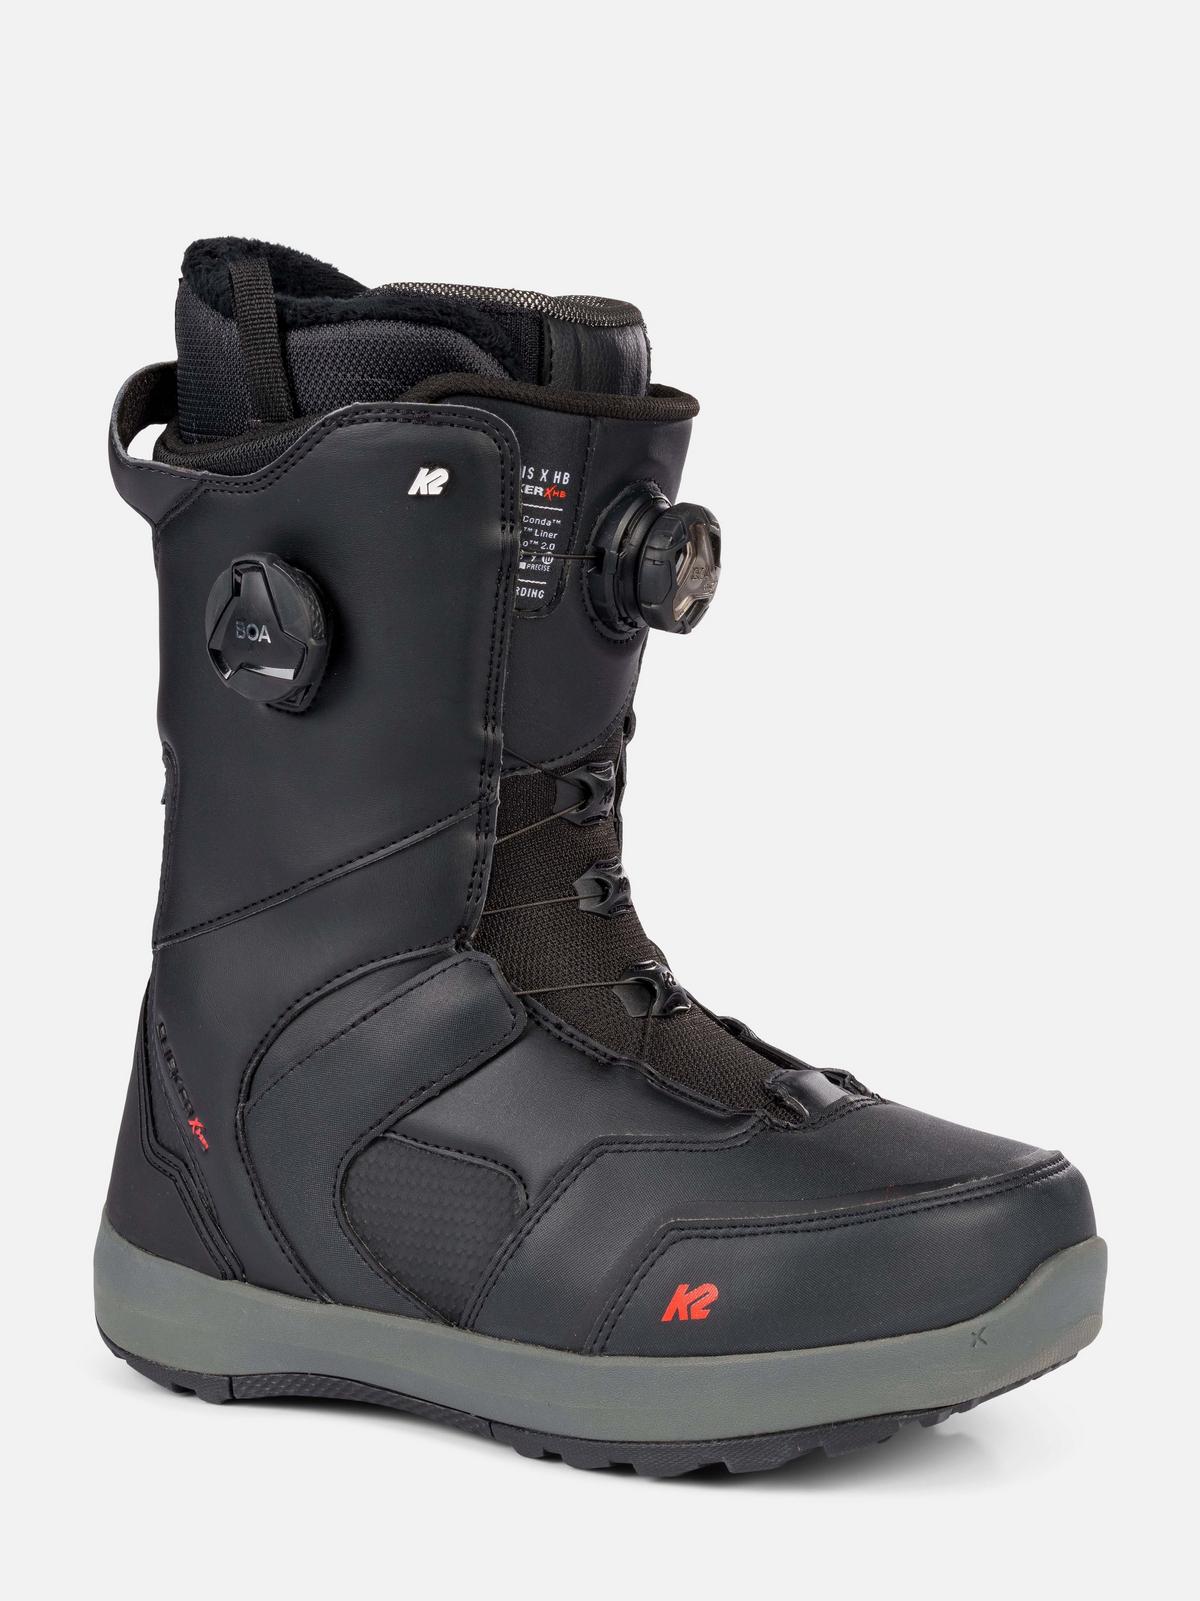 K2 Thraxis Clicker™ X HB Snowboard Boots 2023 | K2 Skis and K2 Snowboarding